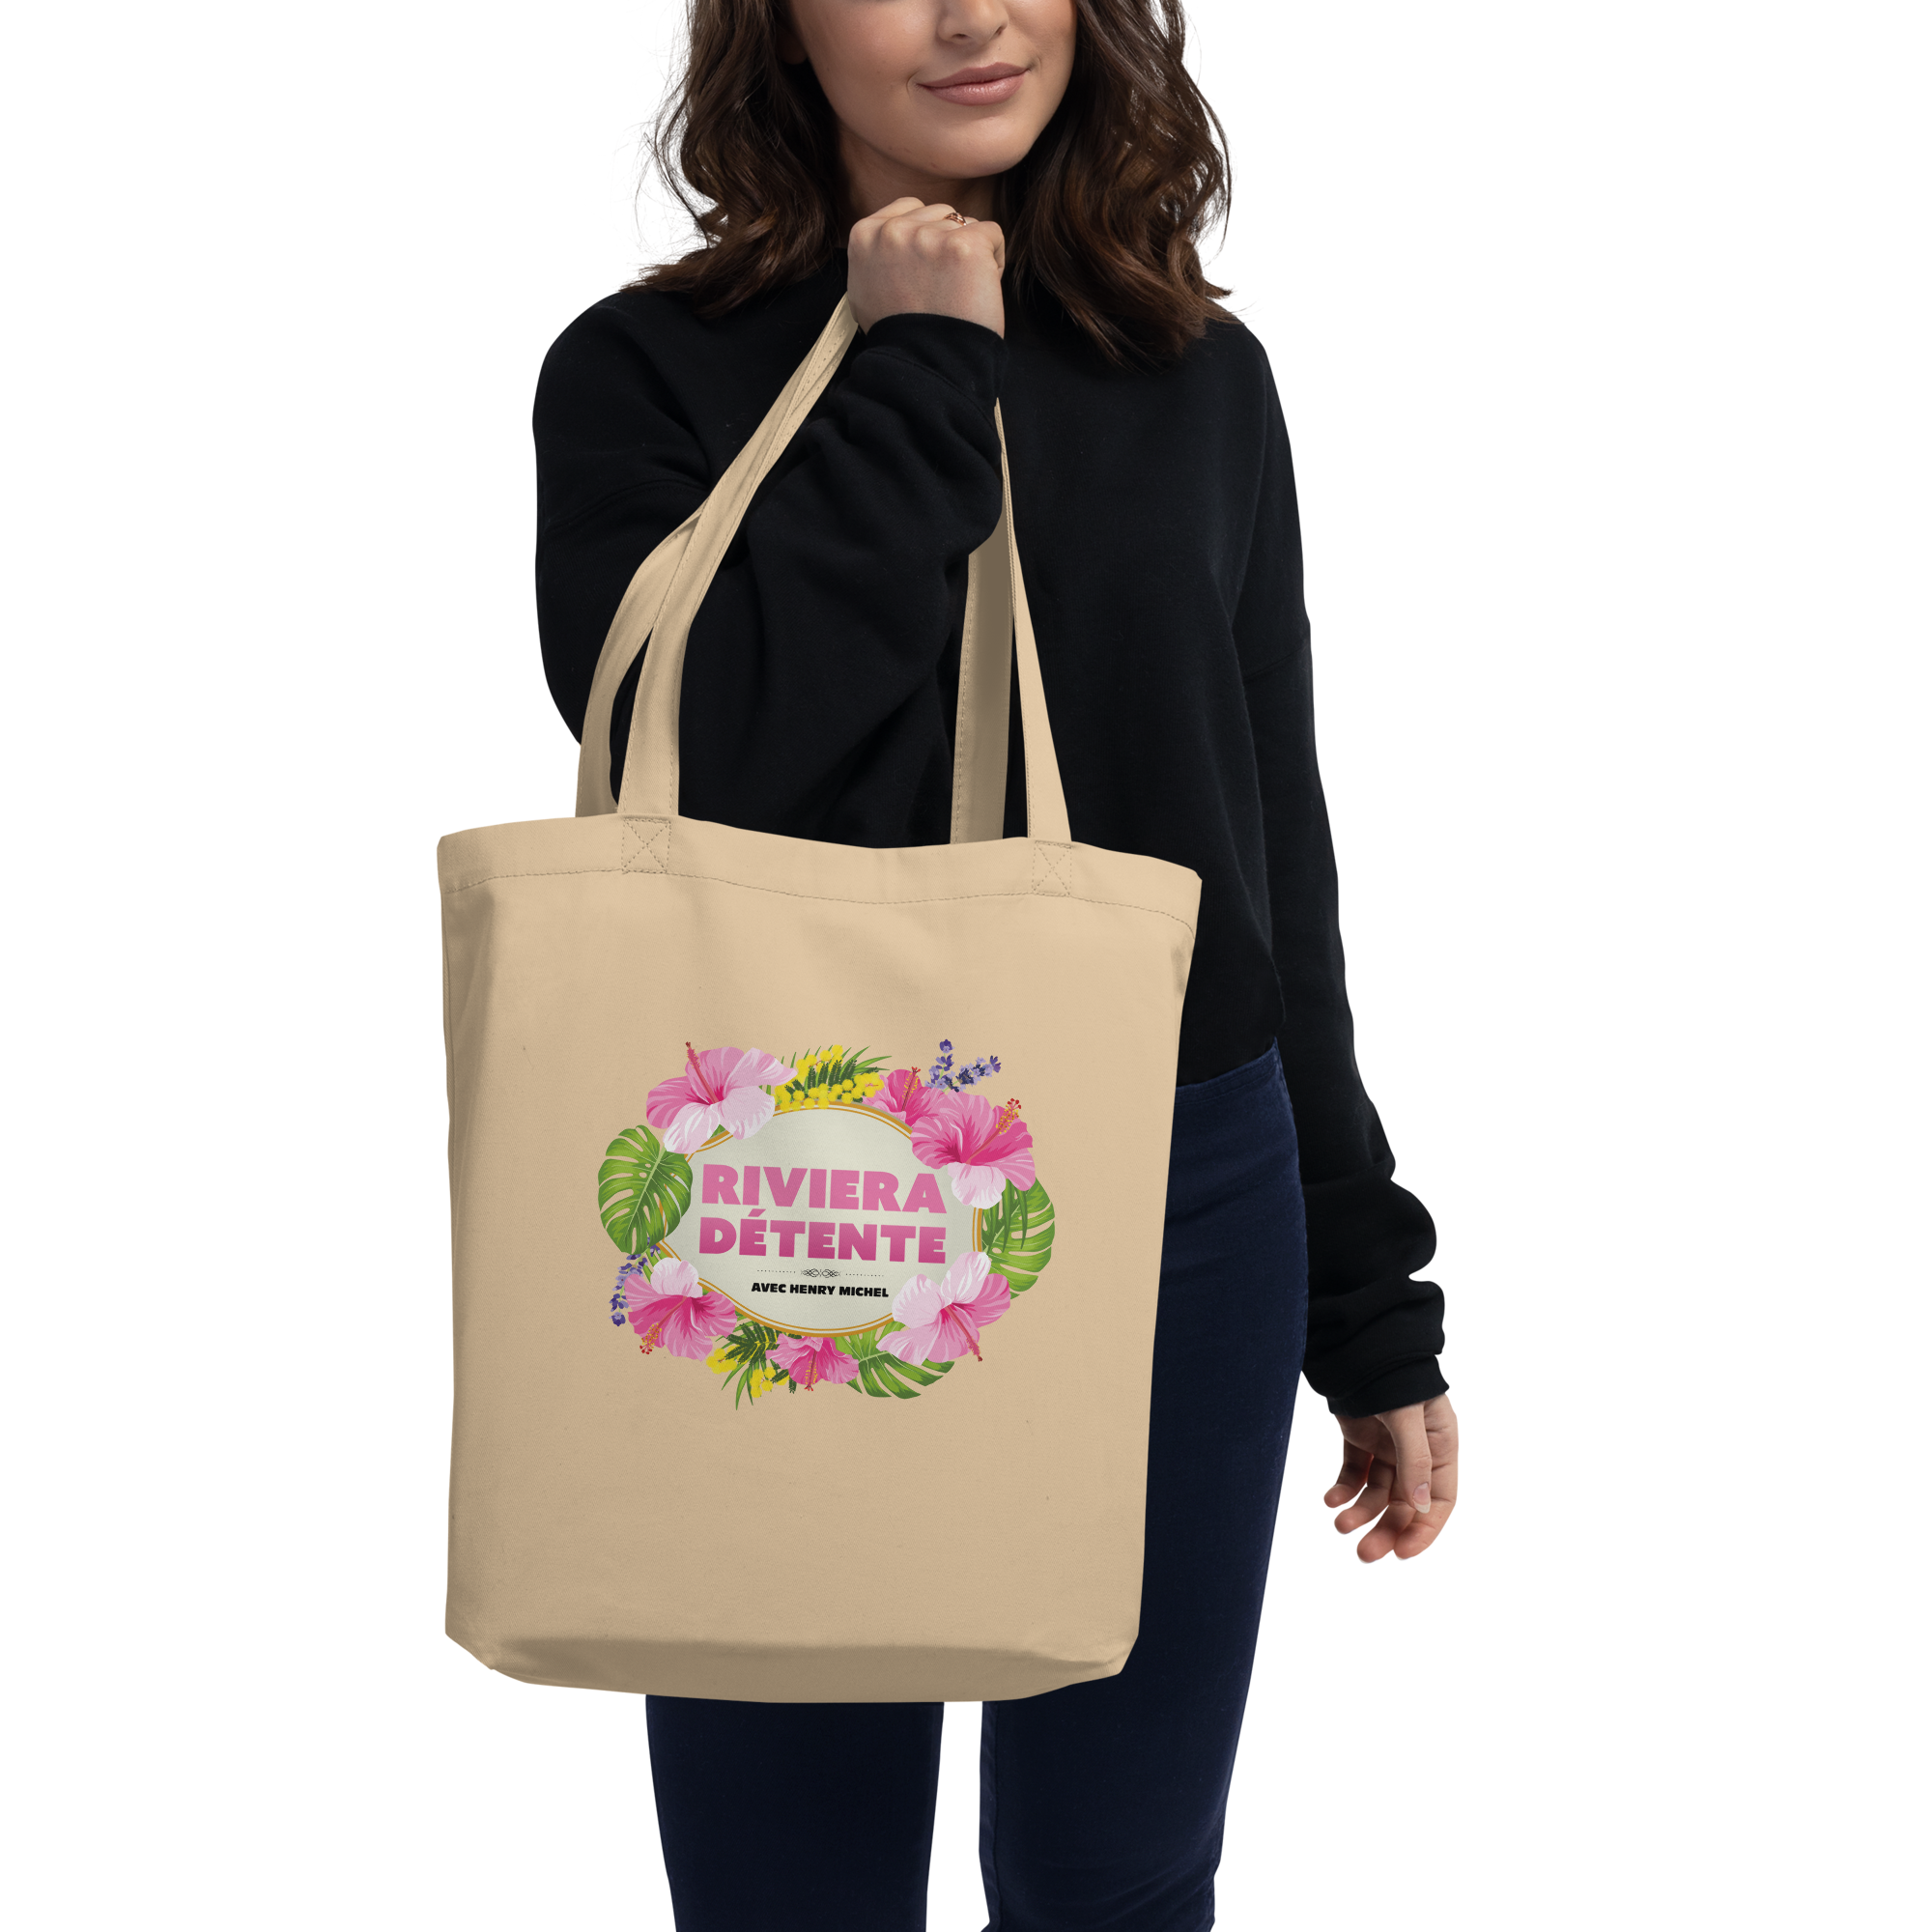 Juicy Couture Glitter Tote Bags